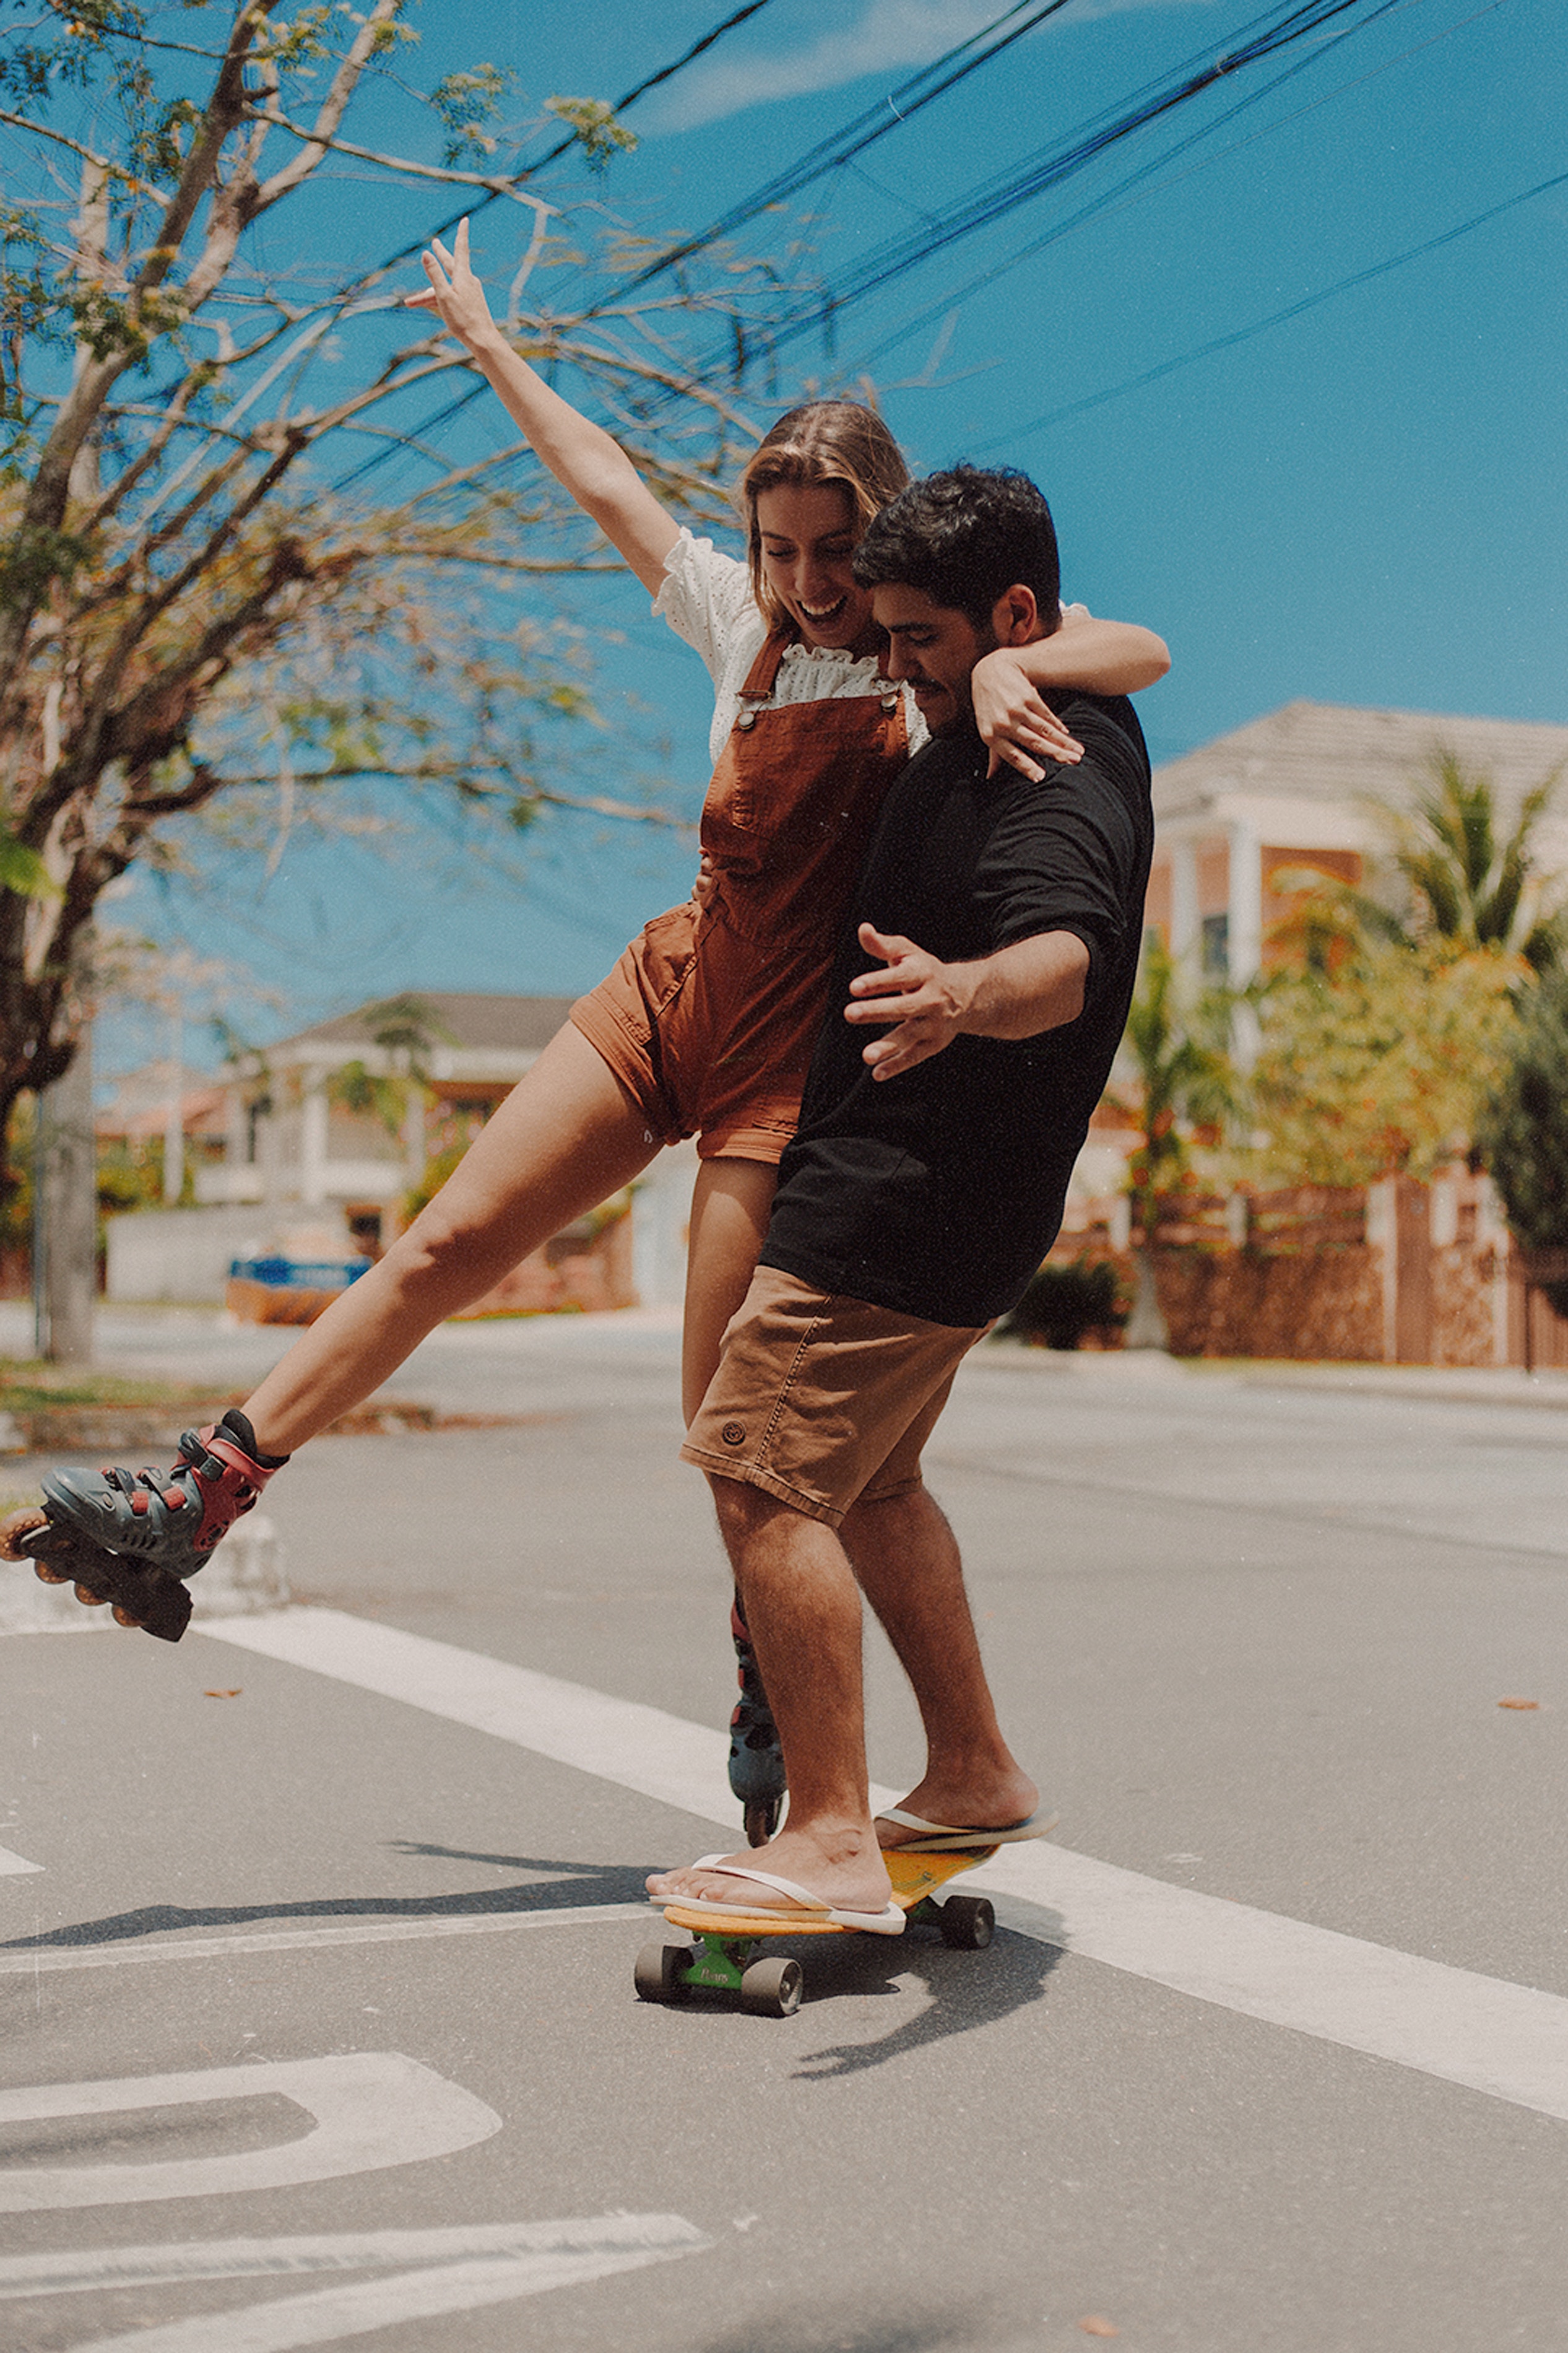 A couple playing on a skateboard together. | Source: Pexels